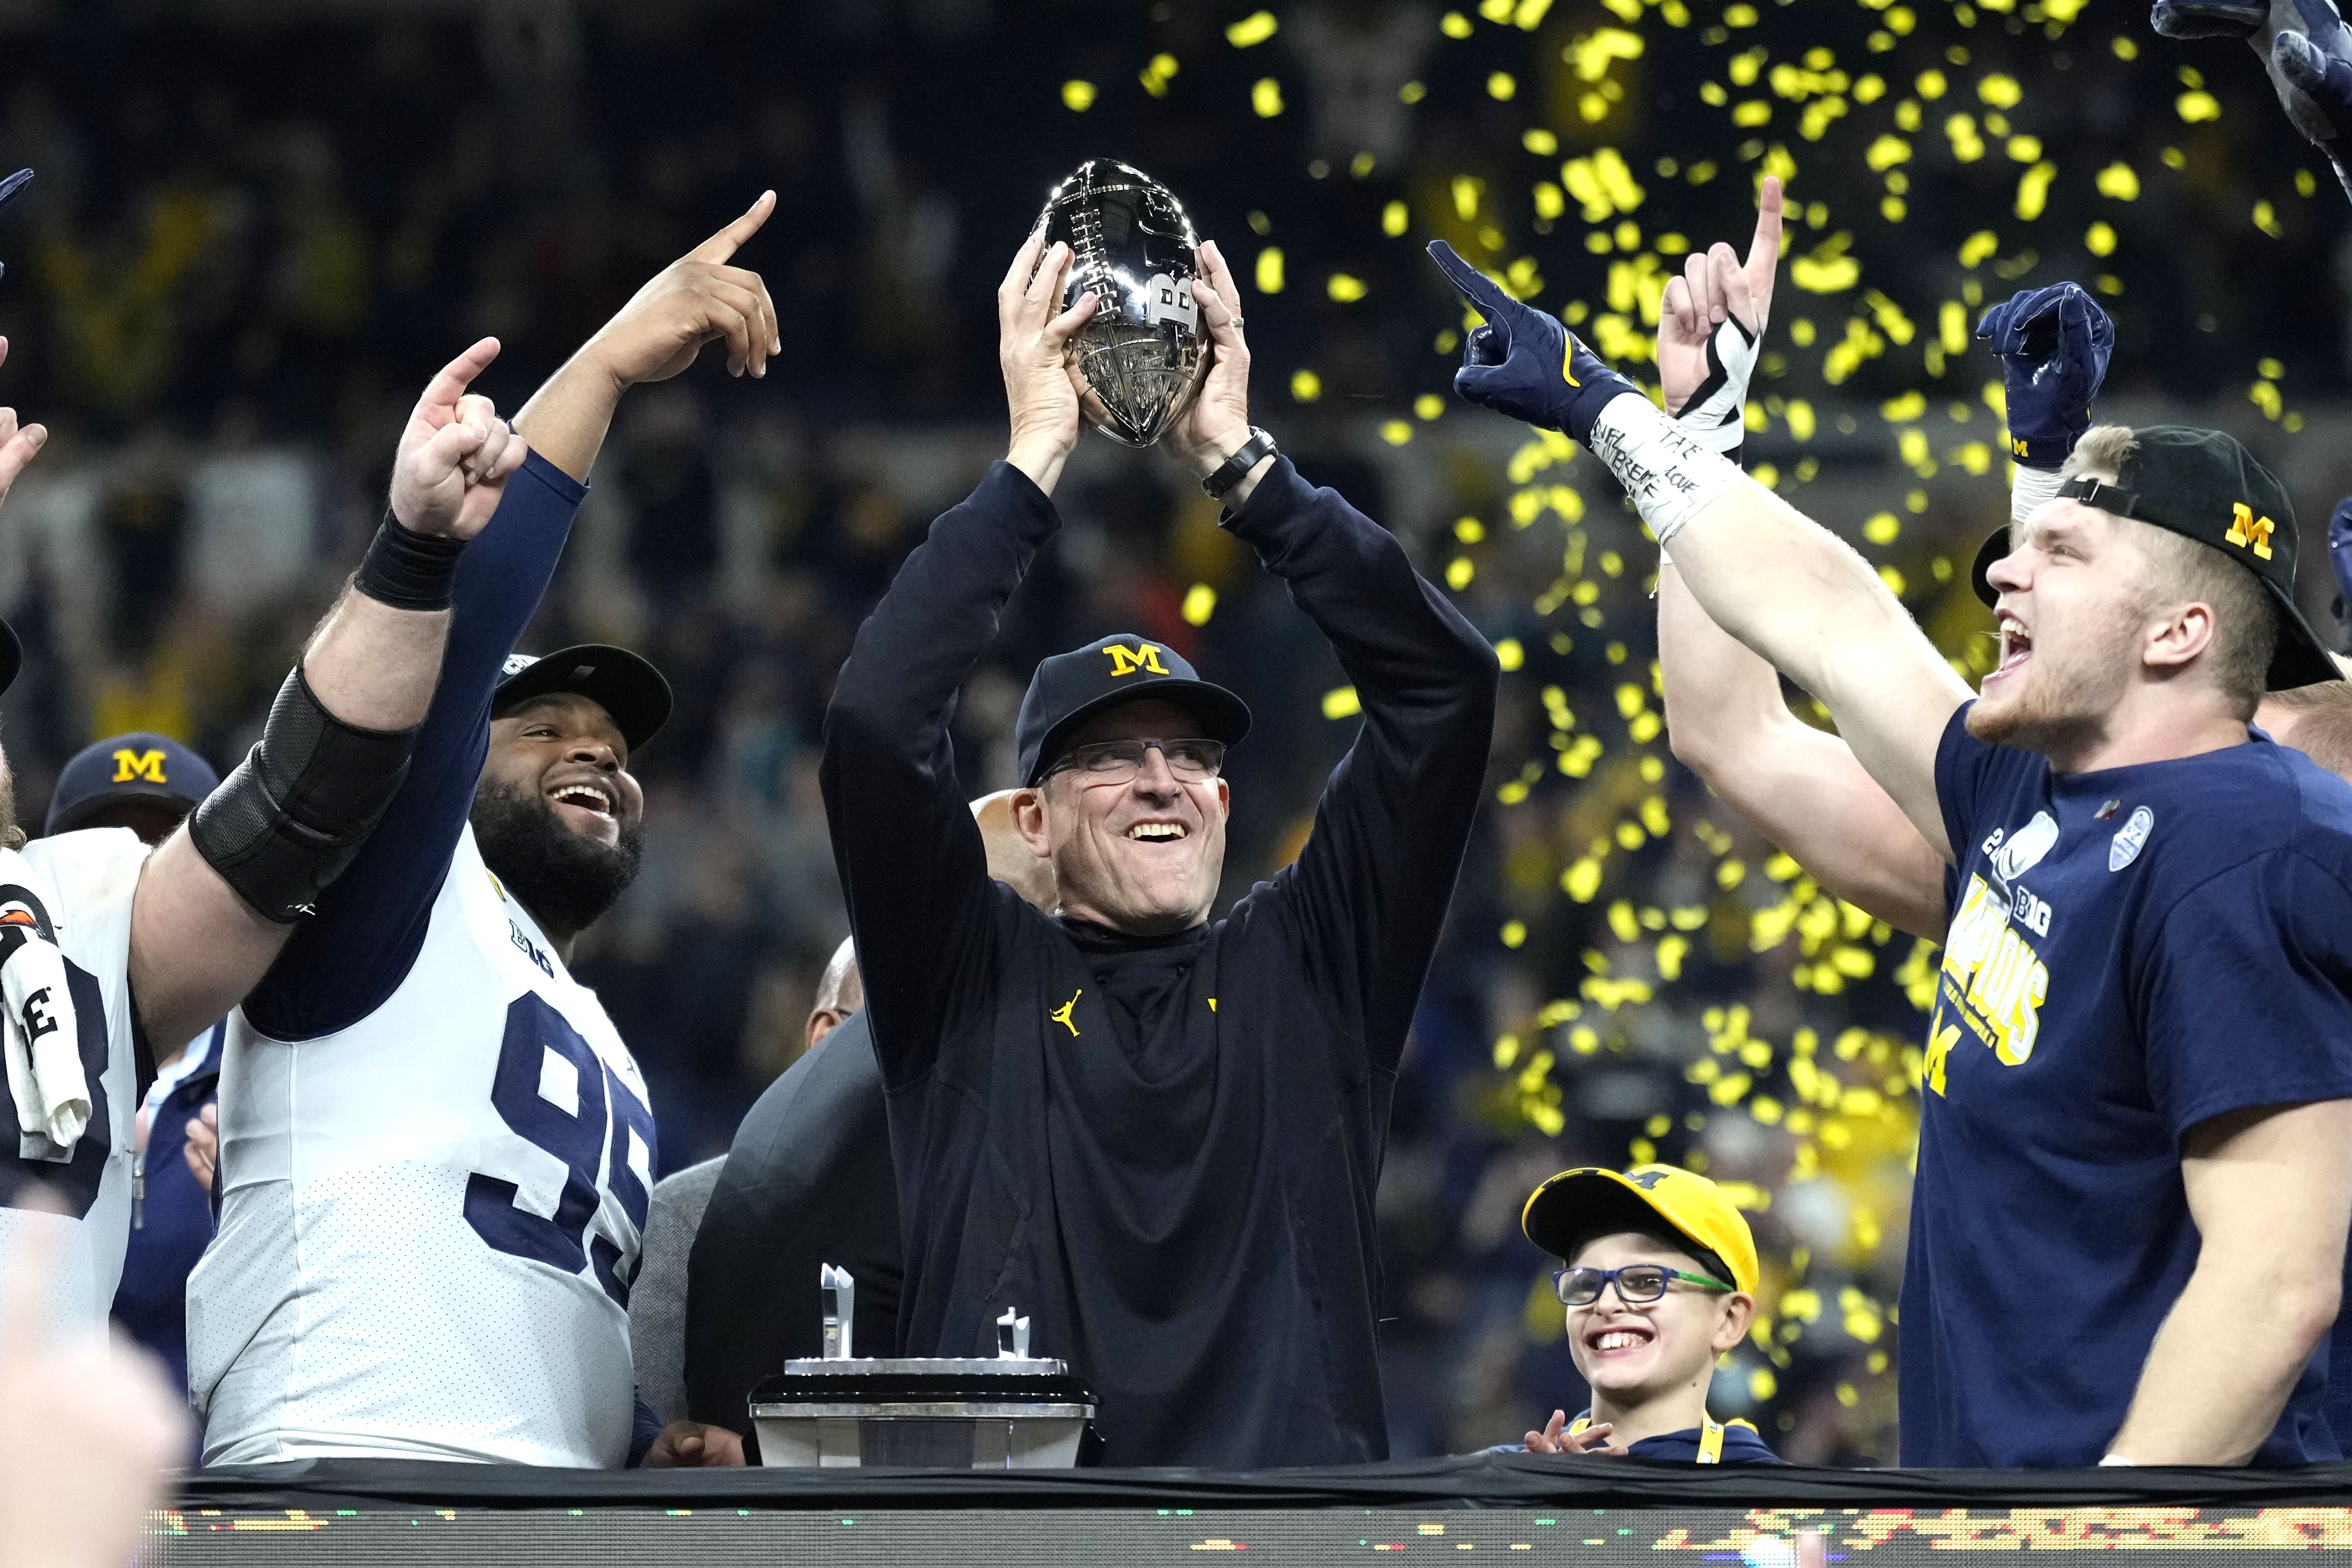 Michigan coach Jim Harbaugh and his players celebrate after their 42-3 win over Iowa in the Big Ten title game.